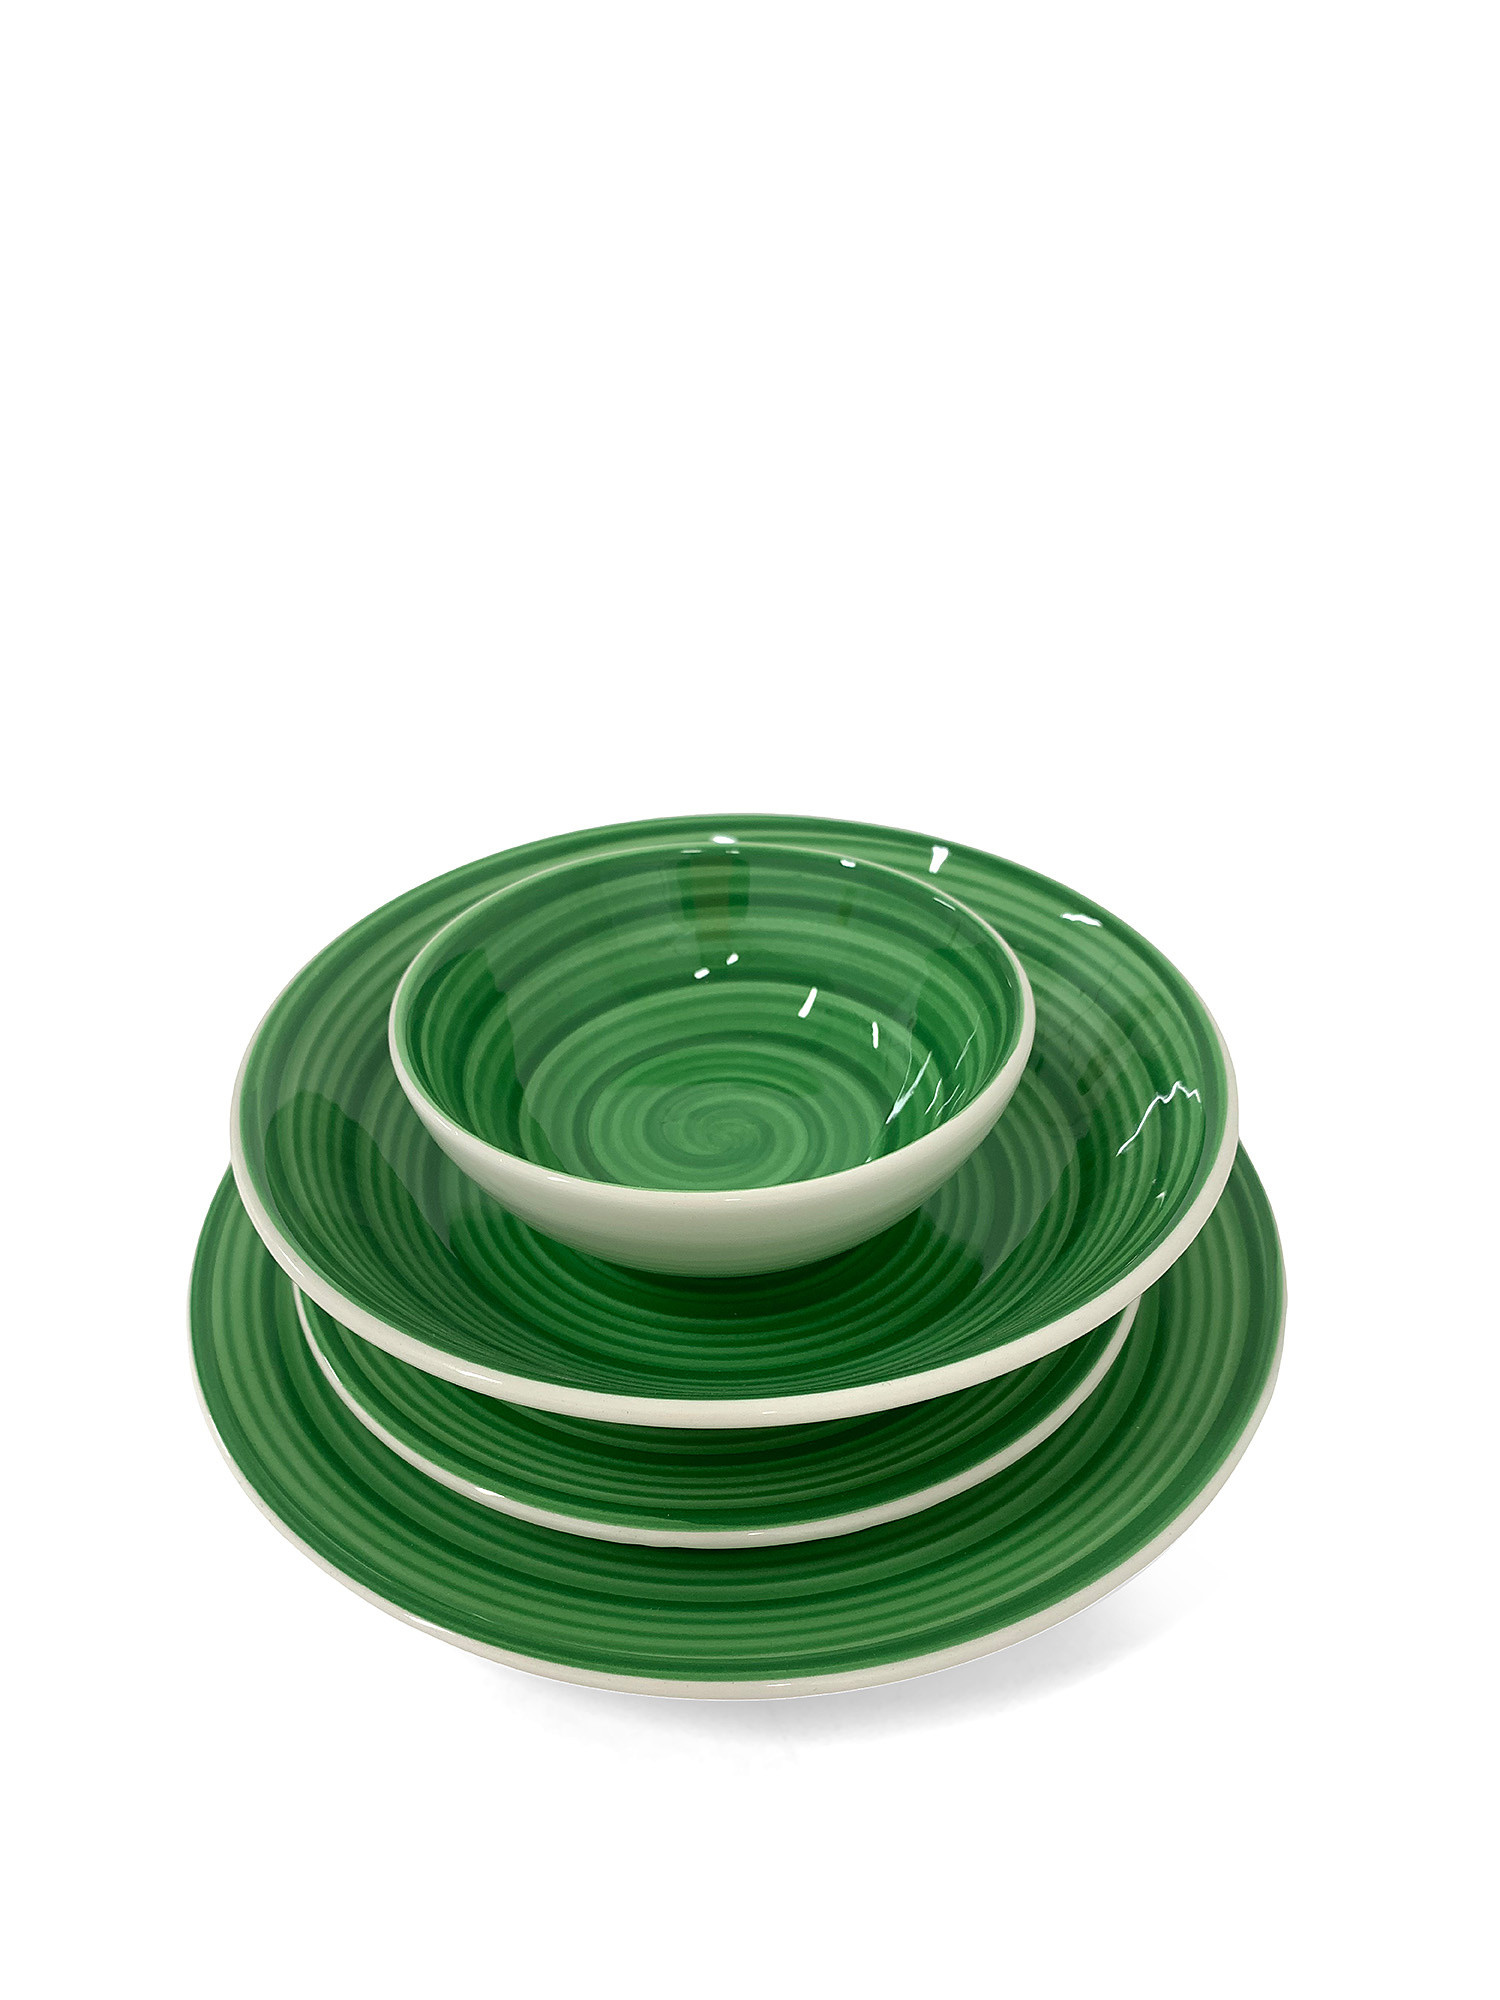 Spiral hand painted ceramic dinner plate, Green, large image number 1